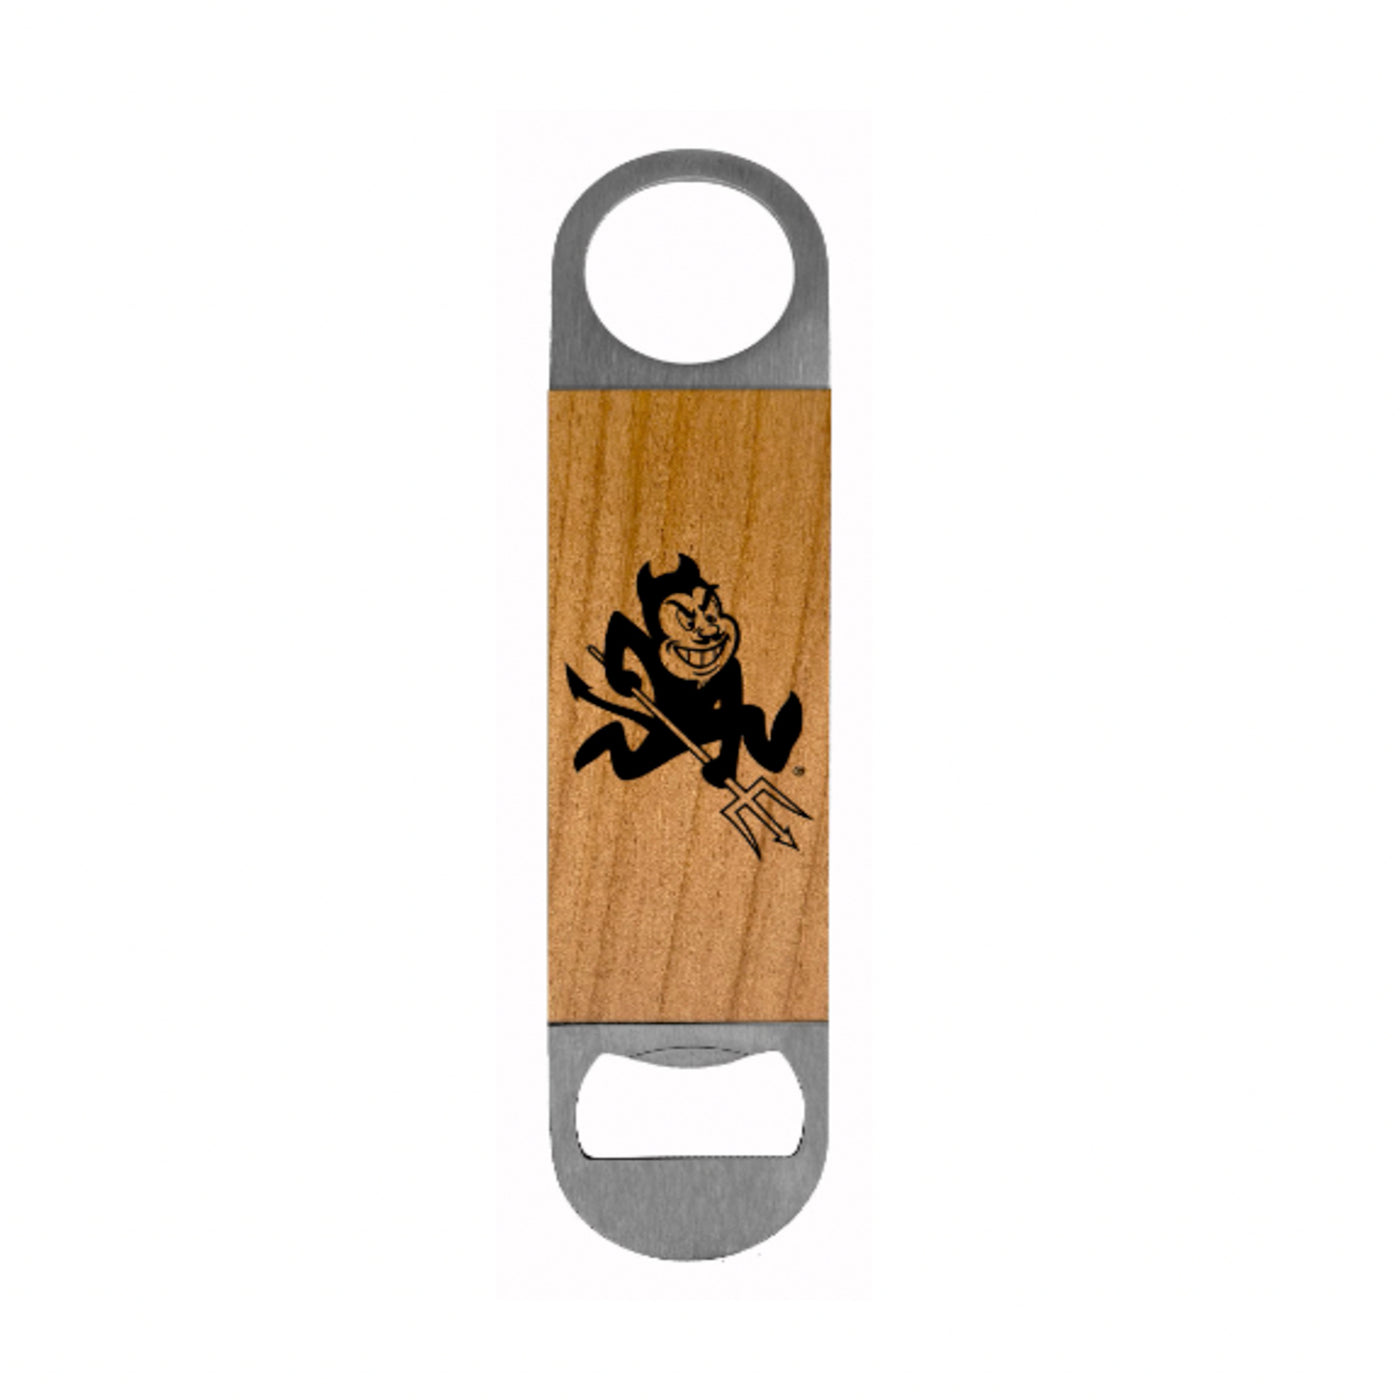 ASU metal bottle opener with a wooden middle and a Sparky printed on it